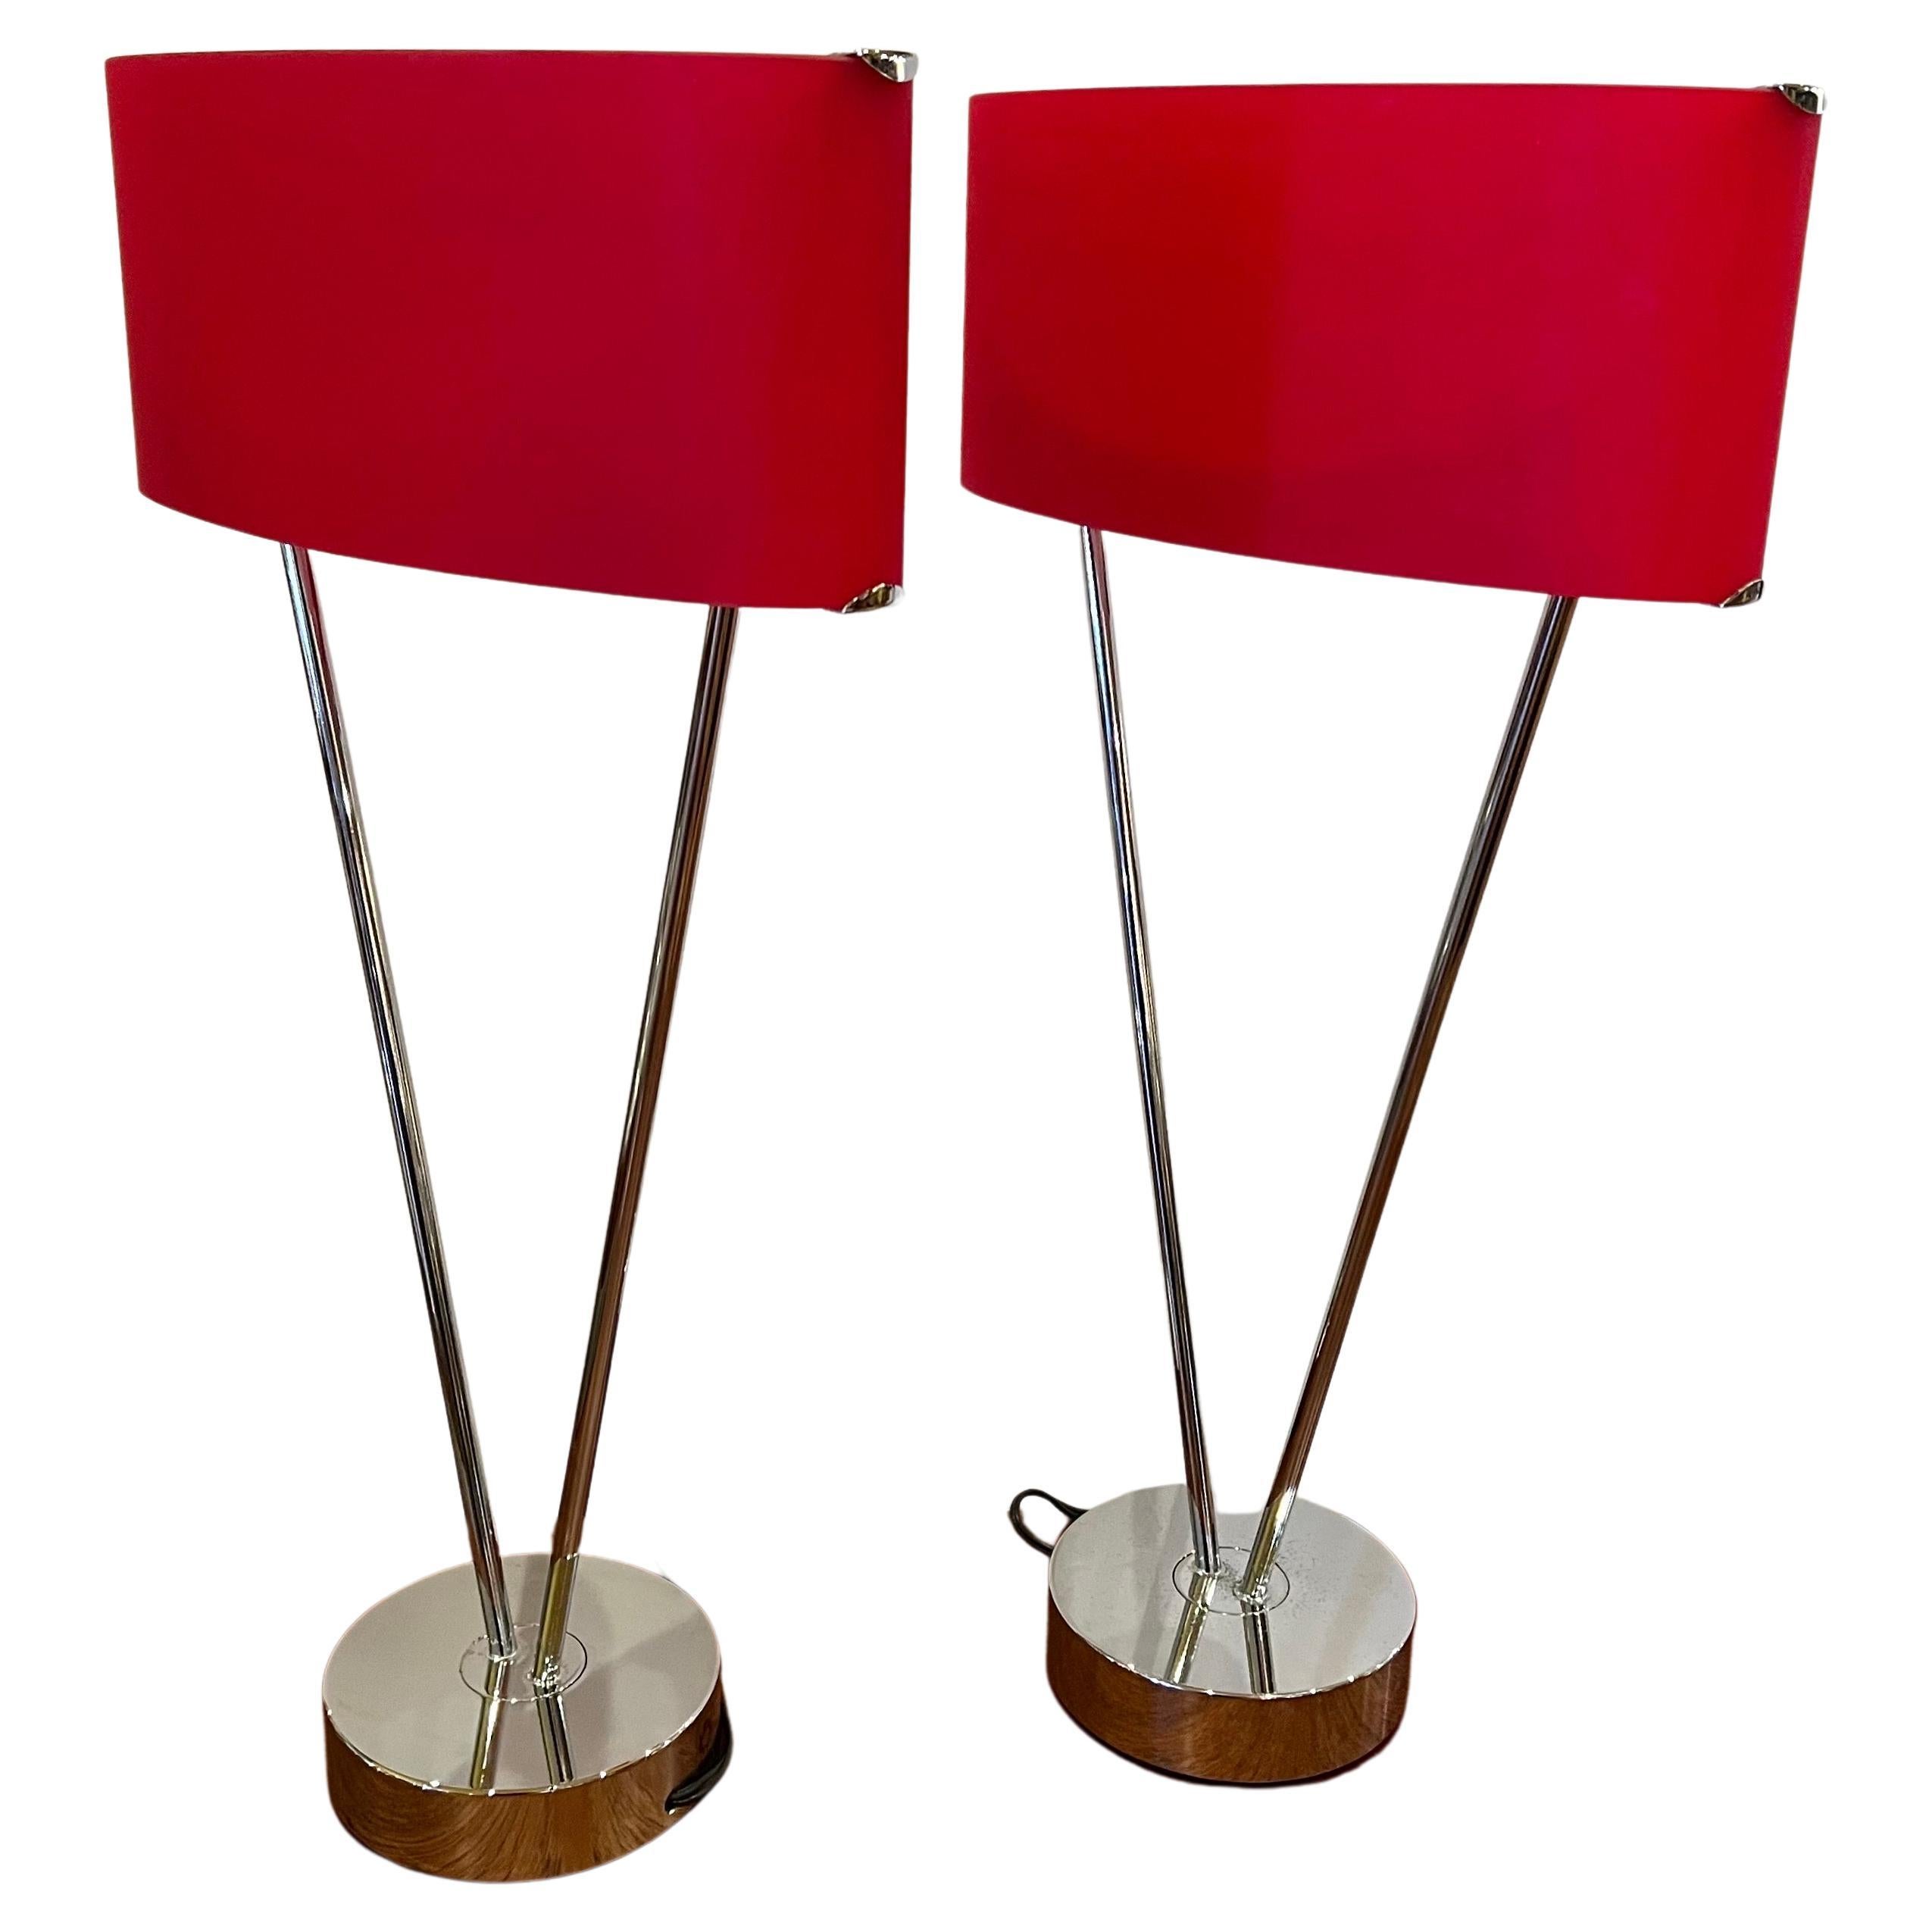 Pair of Postmodern Vittoria Chrome & Glass Shades Table Lamps by Leucos